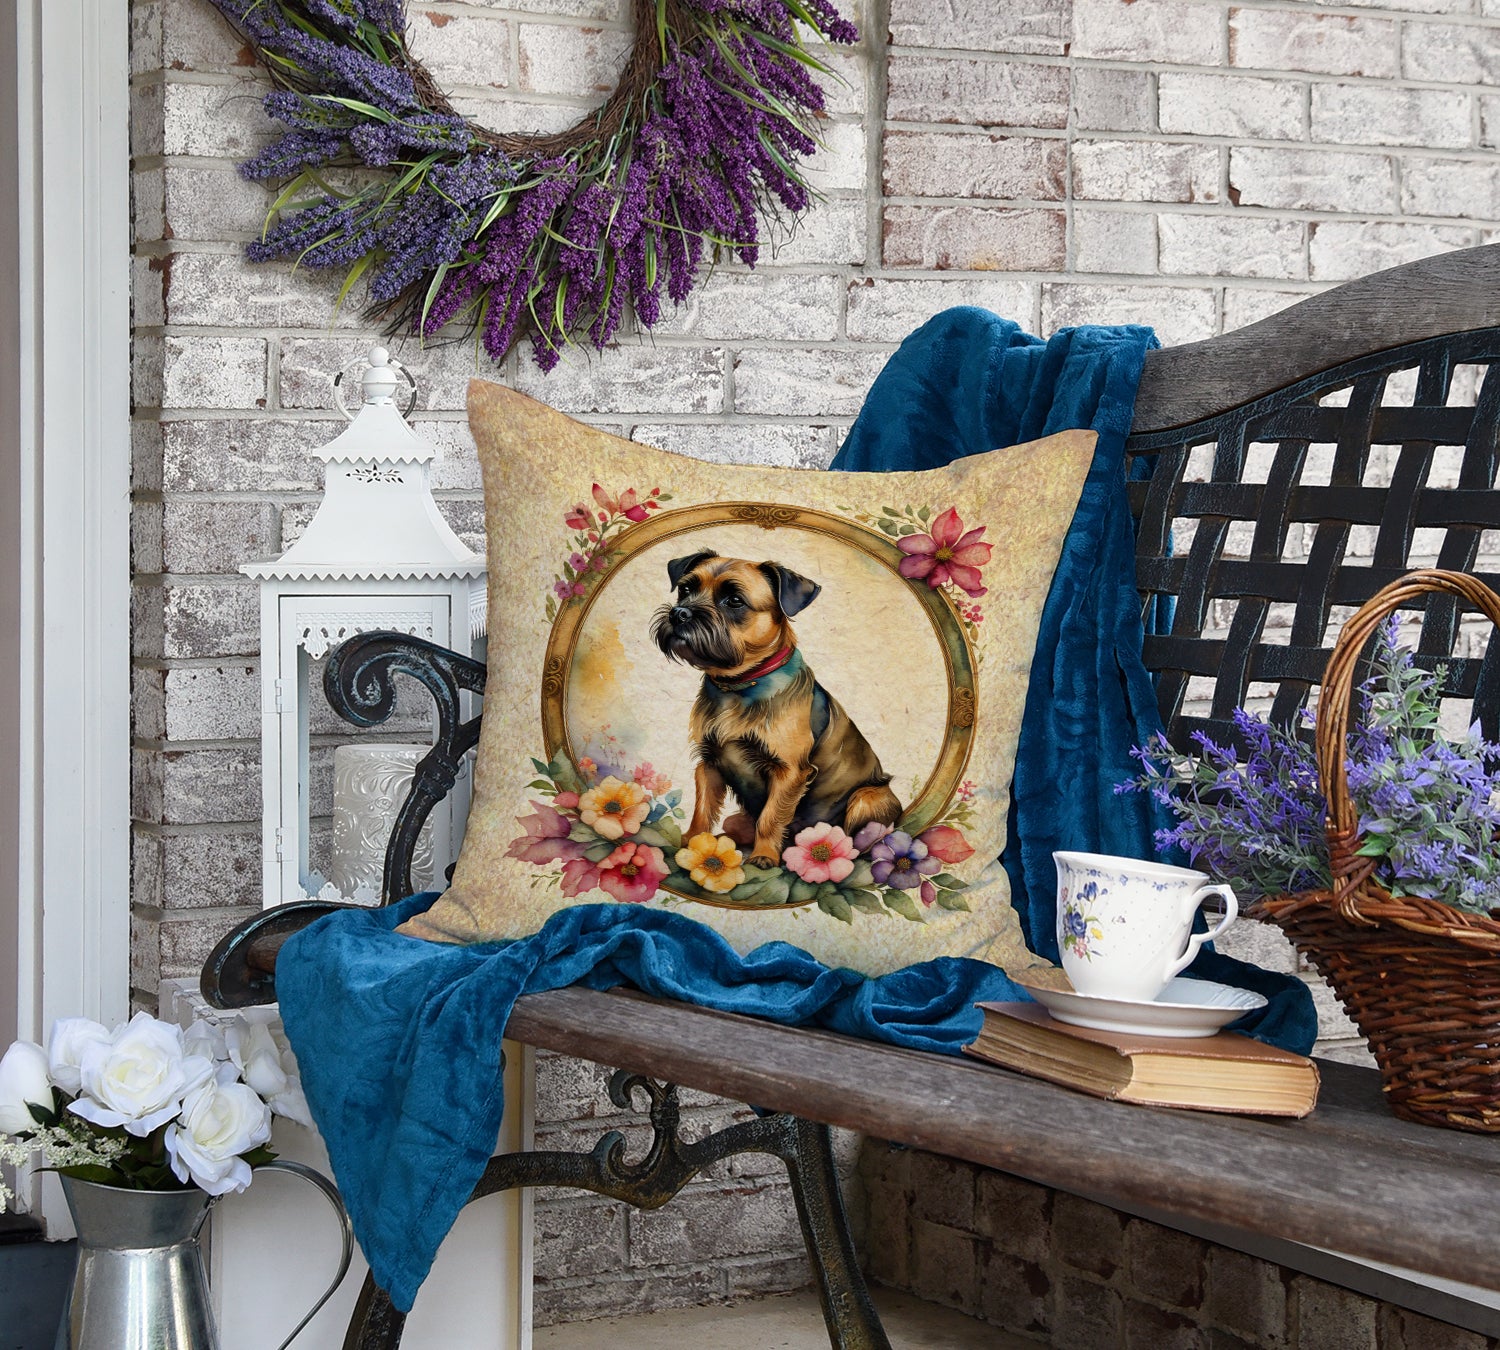 Border Terrier and Flowers Fabric Decorative Pillow  the-store.com.